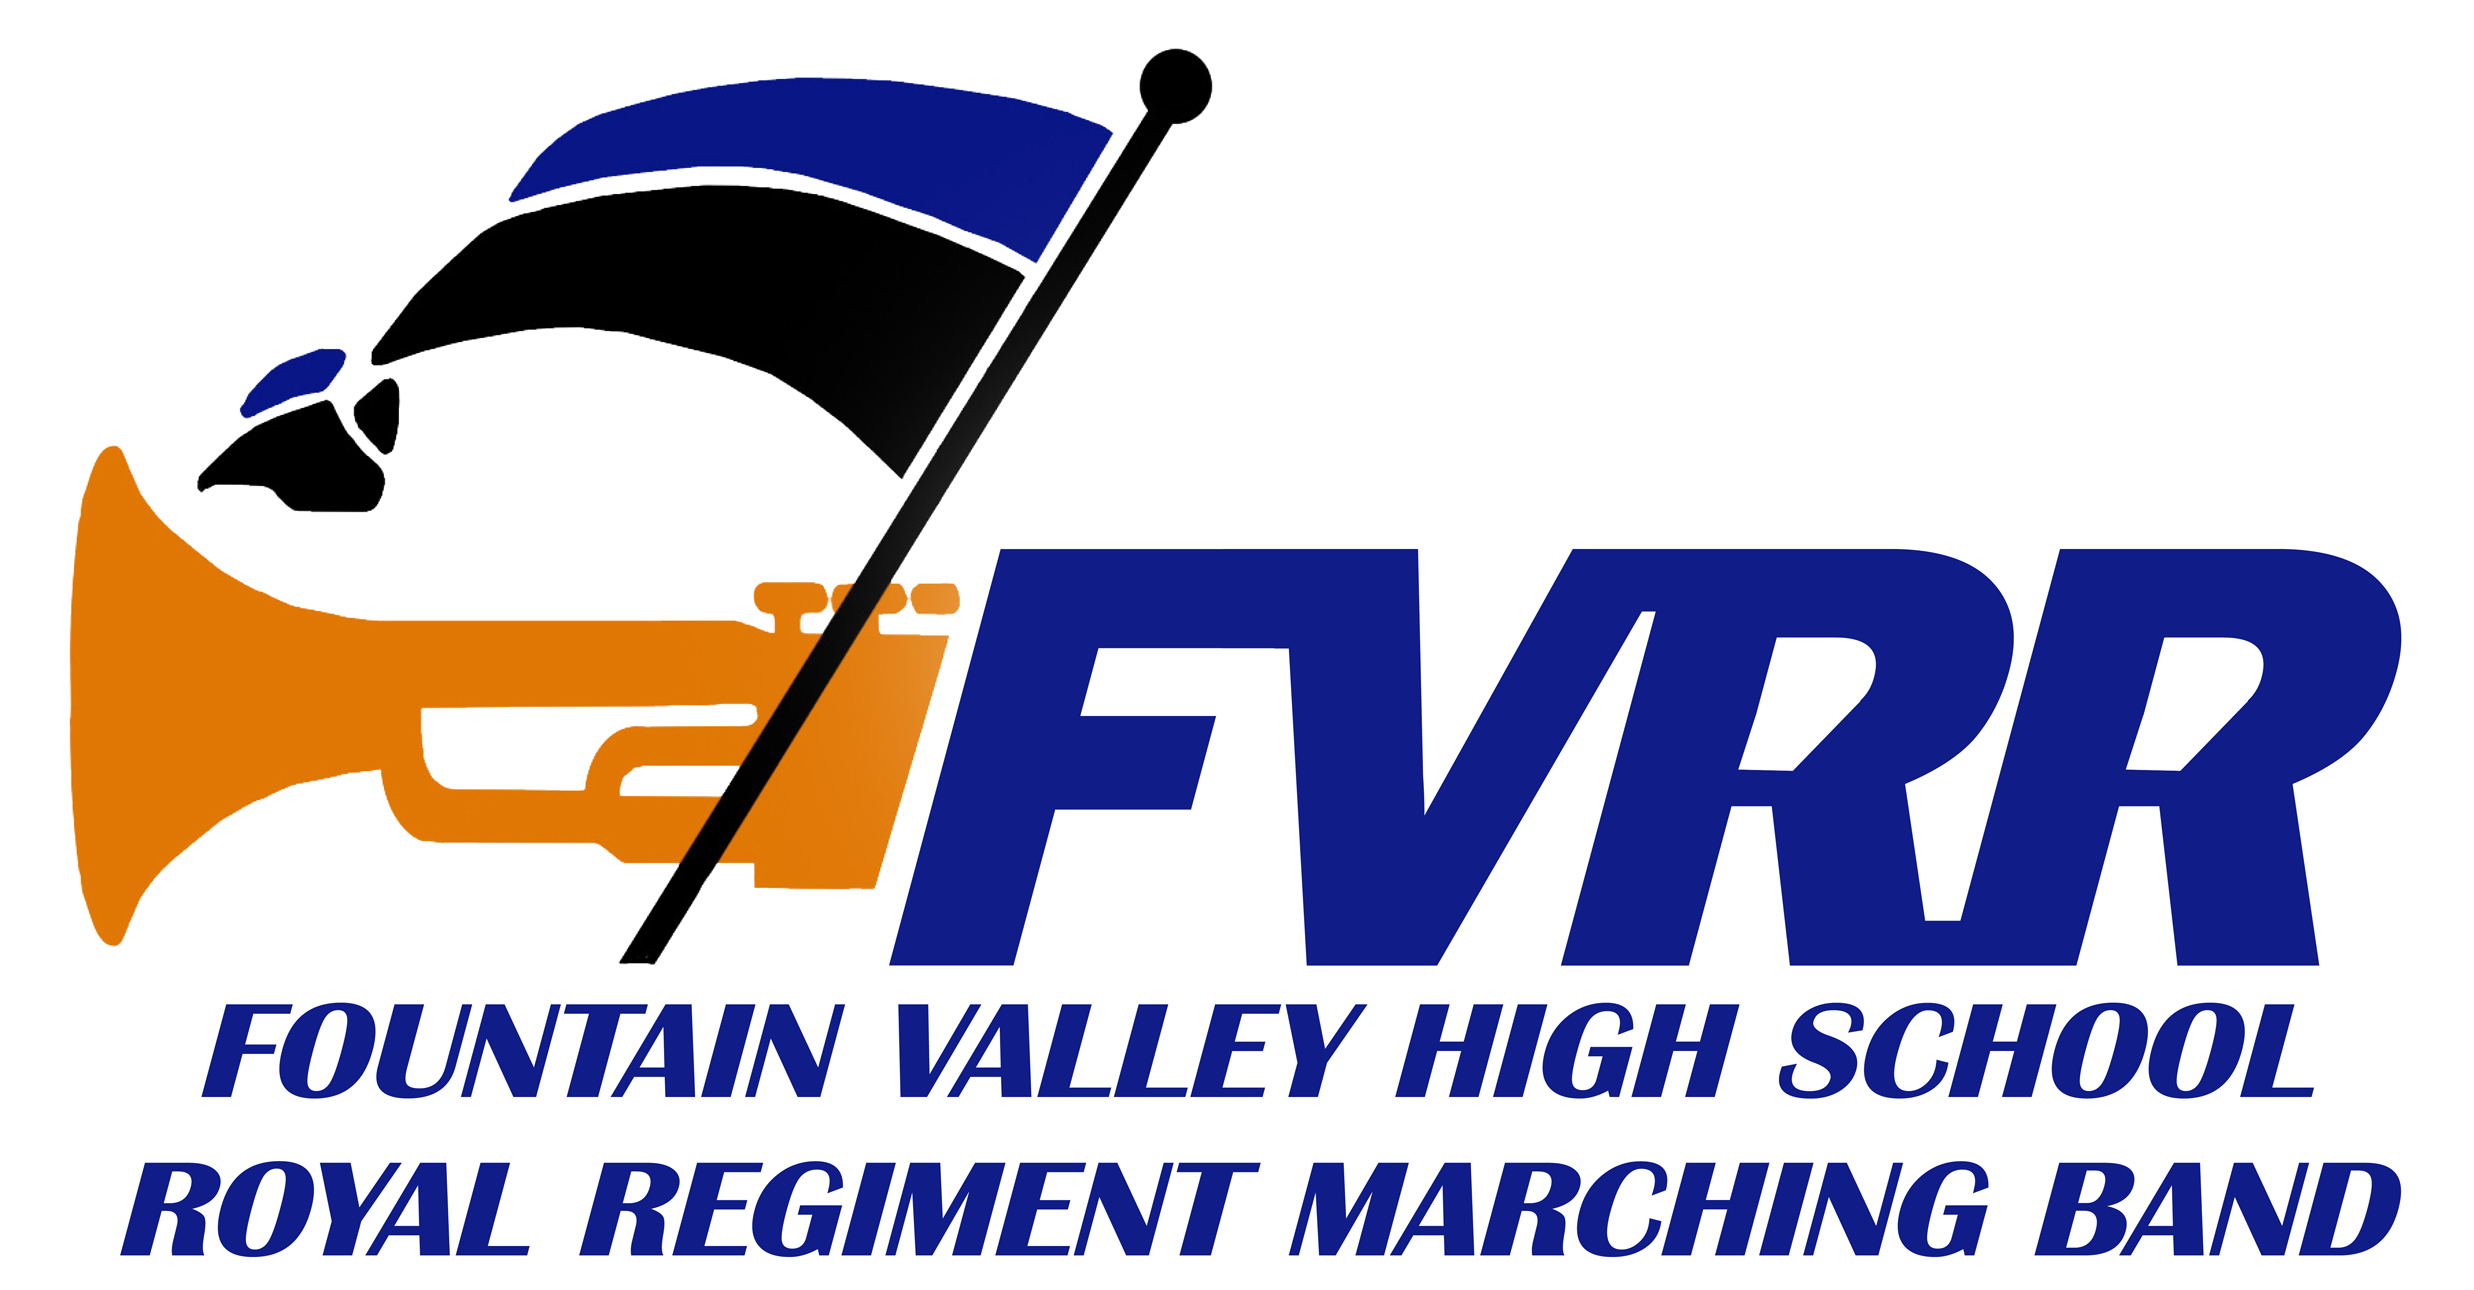 Fountain Valley Royal Regiment